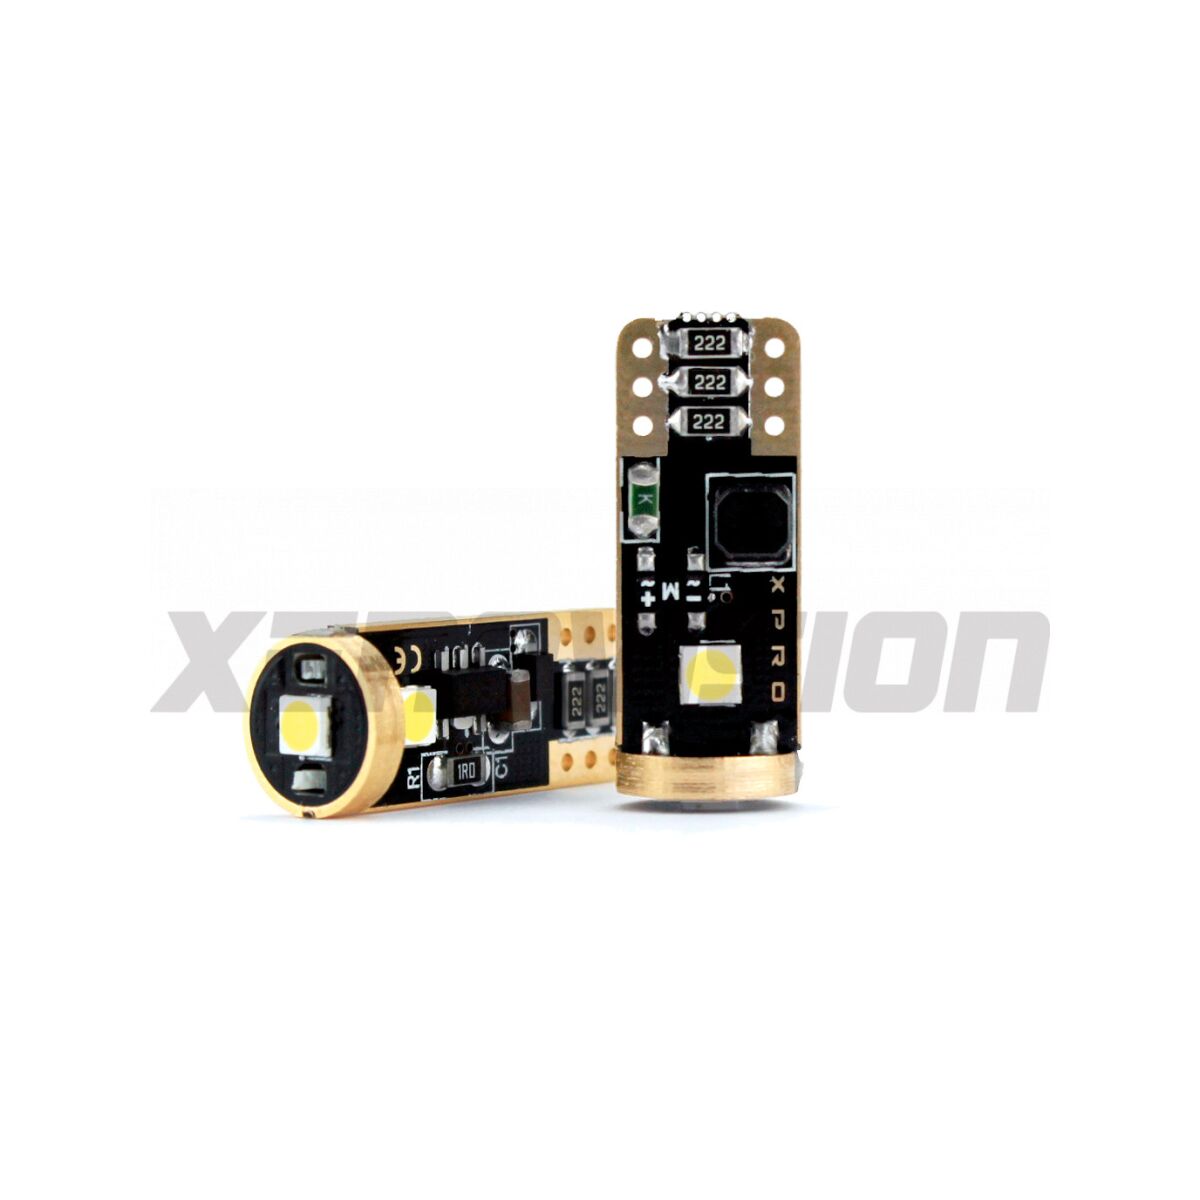 https://www.xenovision.it/storage/images/products/x1200sq/t10-w5w-goldstar-coppia-led-canbus-next-gen-5.jpg?v=11eed2e8a05bbbb4508ffa229a7b84c0